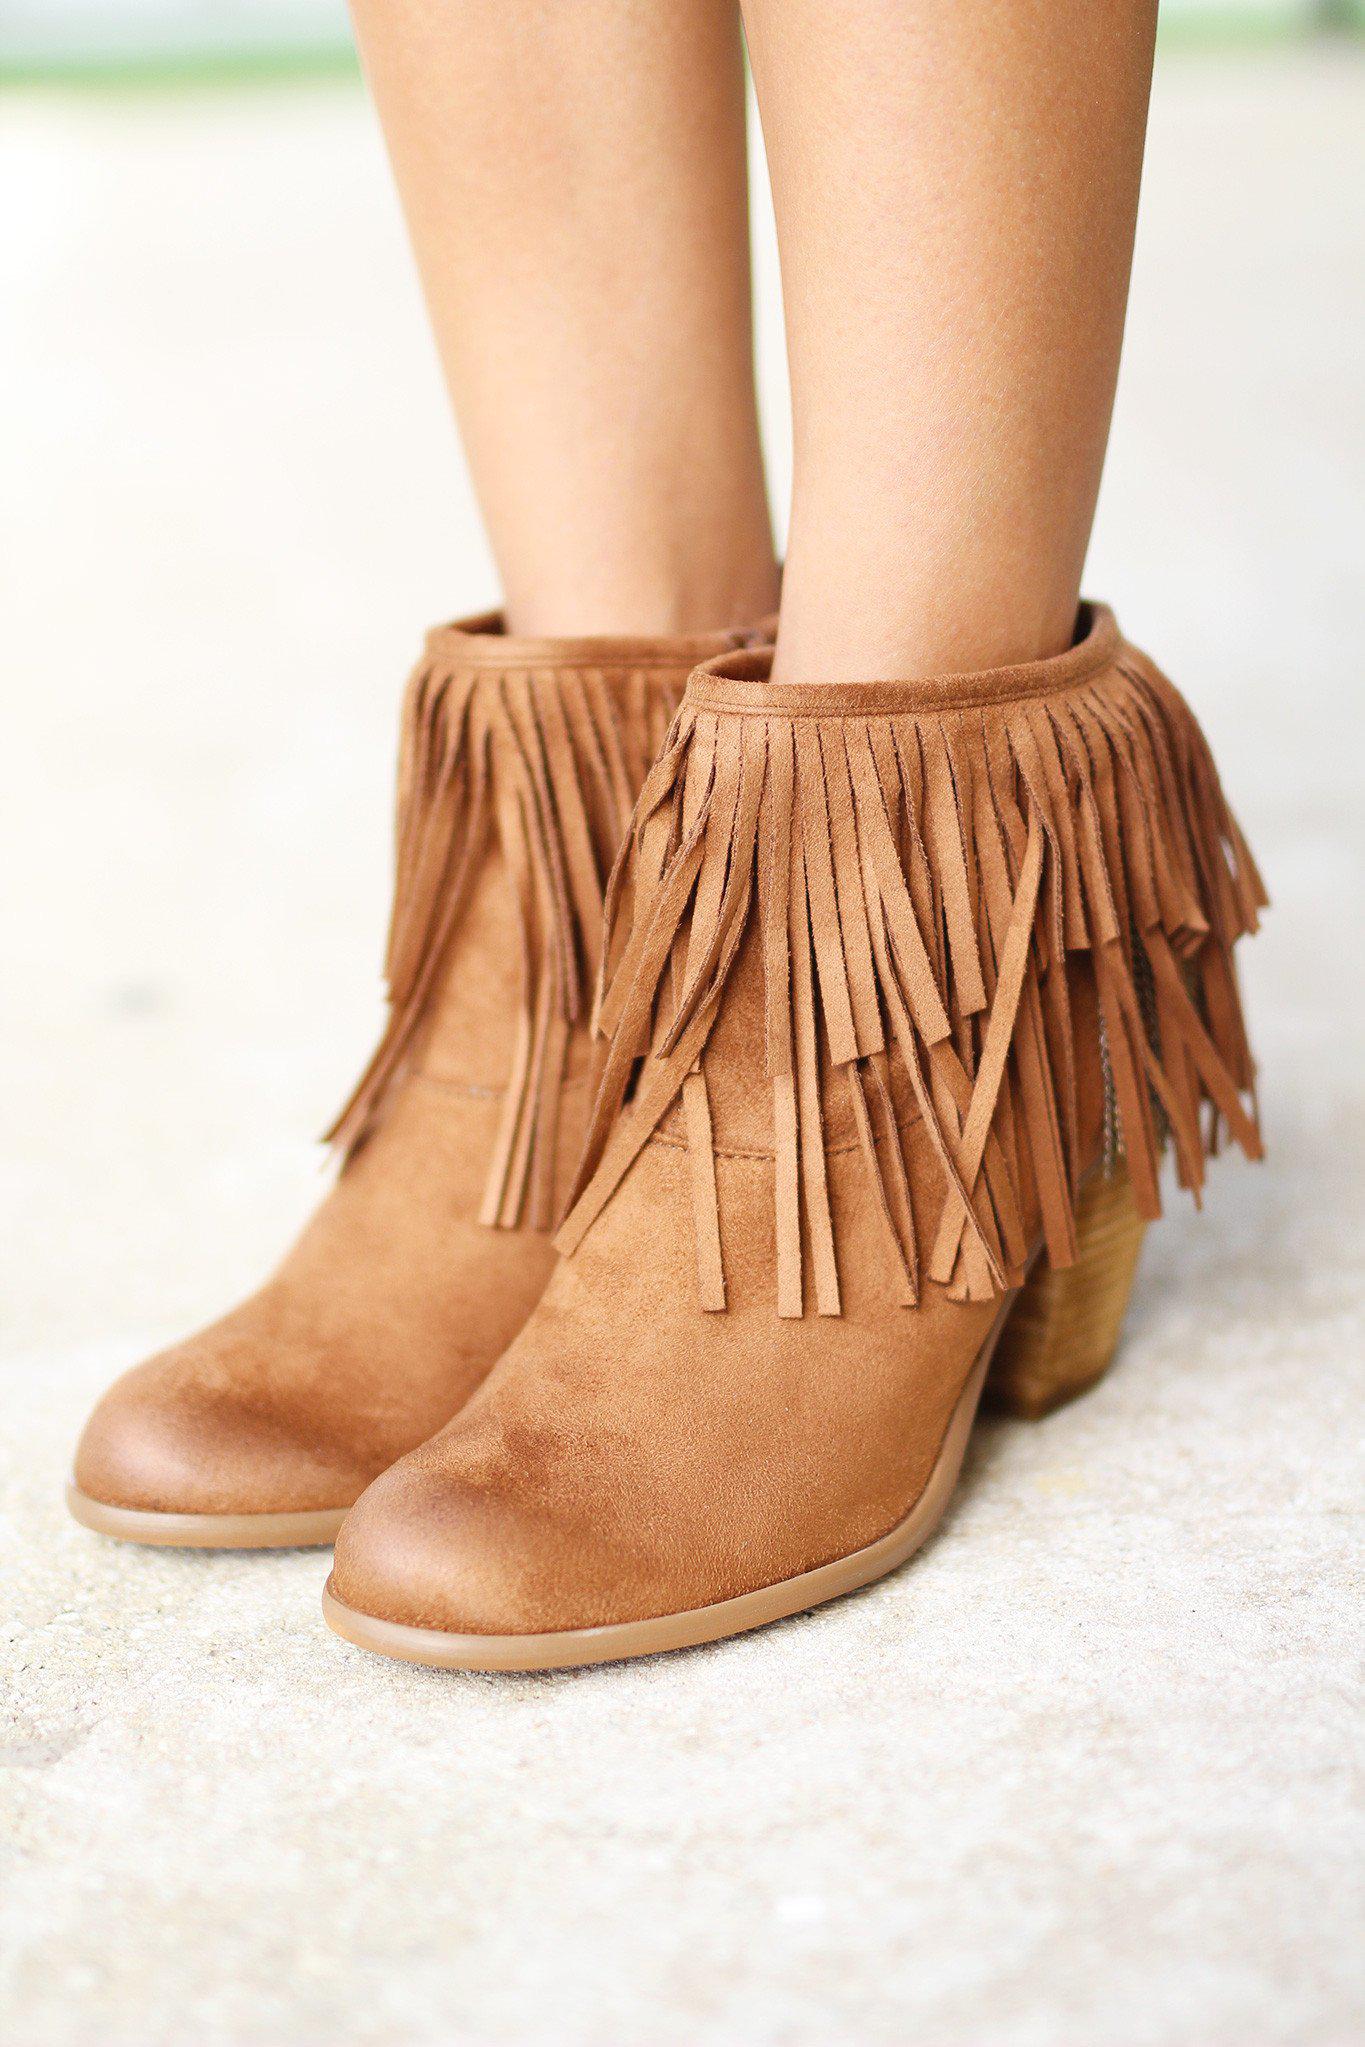 Auriga Tan Booties | Not Rated Booties – Saved by the Dress